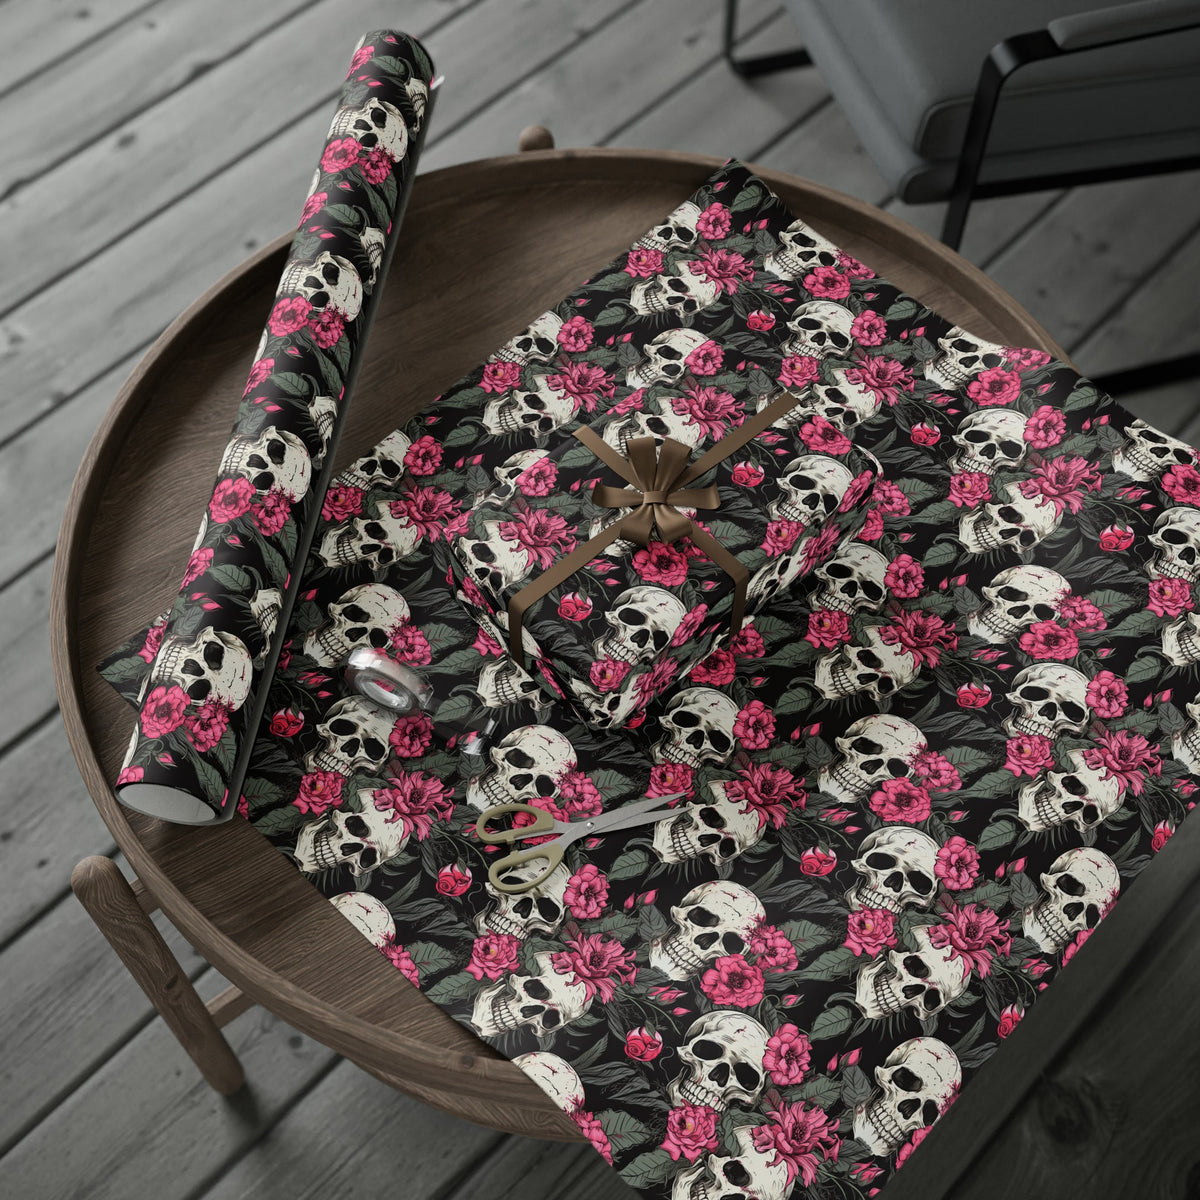 Goth Glam Pink Flowers and Skulls Gift Wrap - Goth Cloth Co.Home Decor50685269346097717045